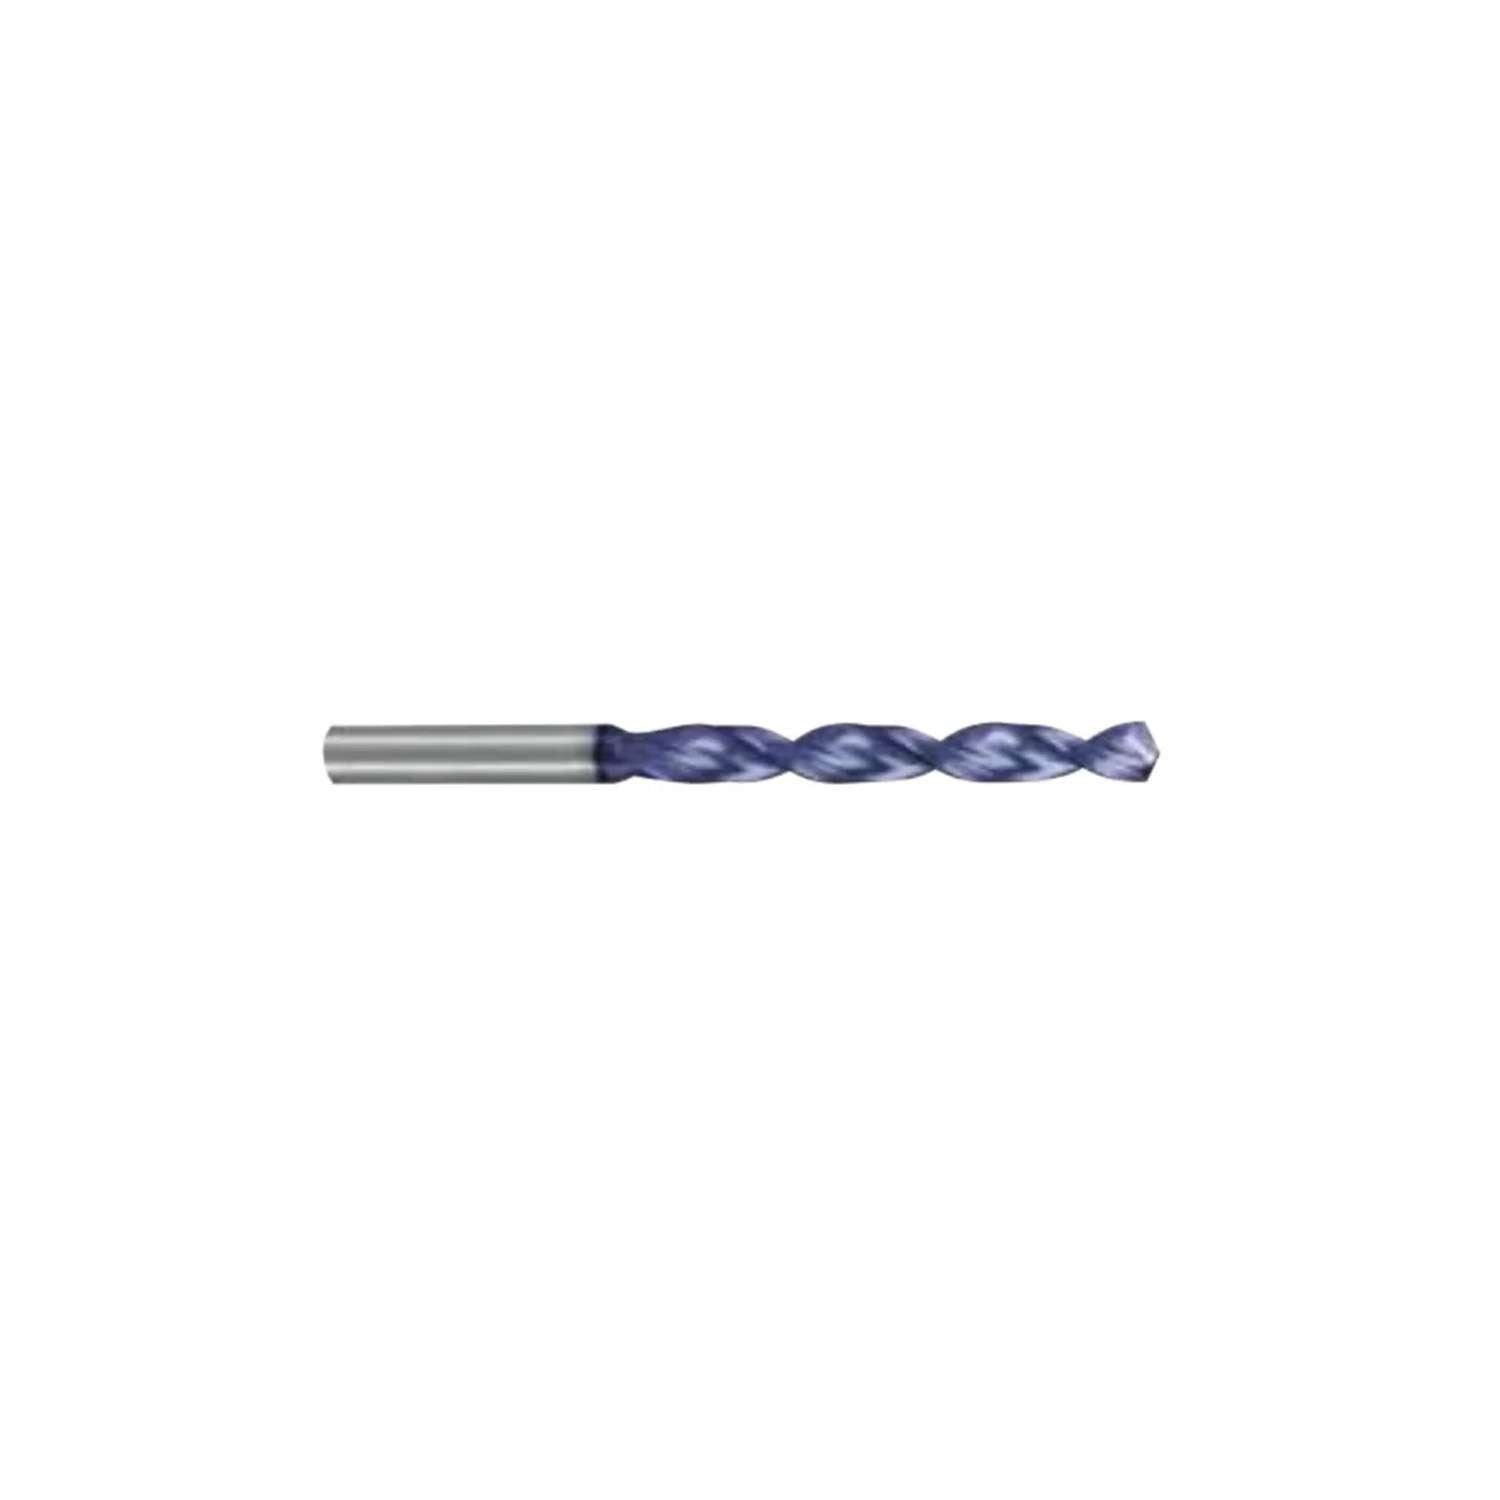 Specific cylindrical drill for steel / cast iron / alsi DIN 338 type HD 8.8